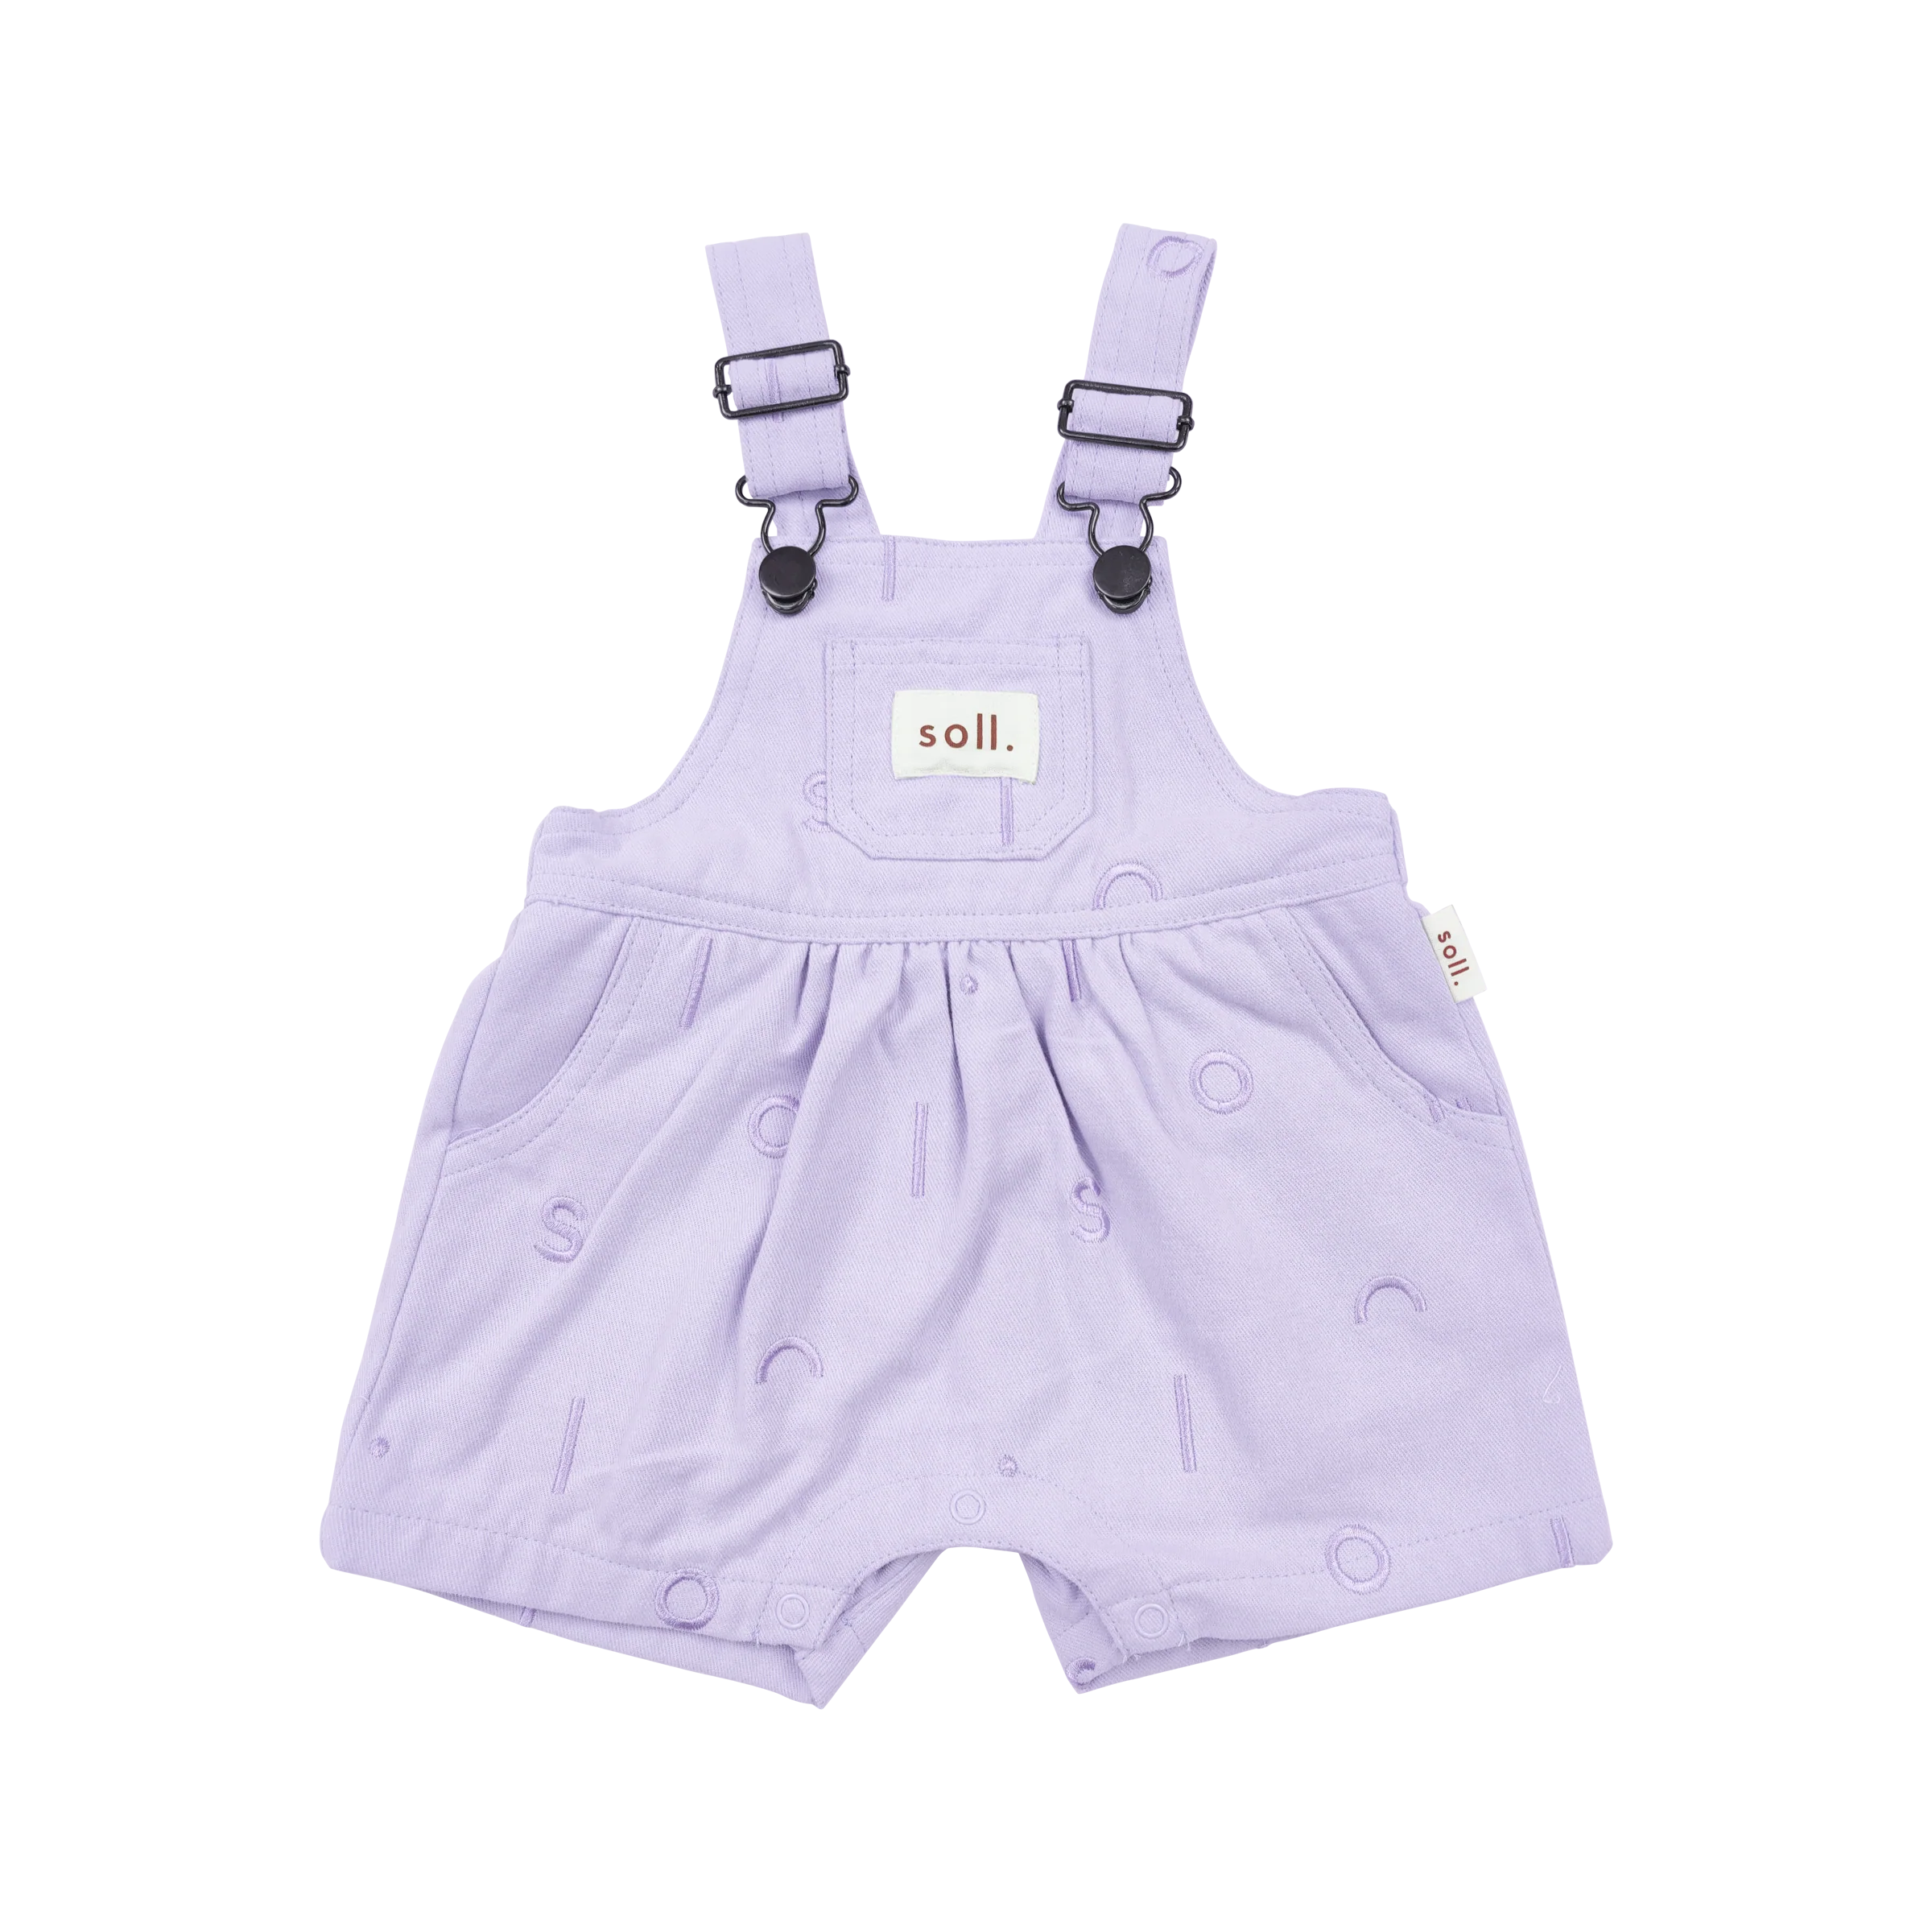 【soll. the label】Soll Pattern Short Overall - Lilac | KIWIBABY powered by  BASE